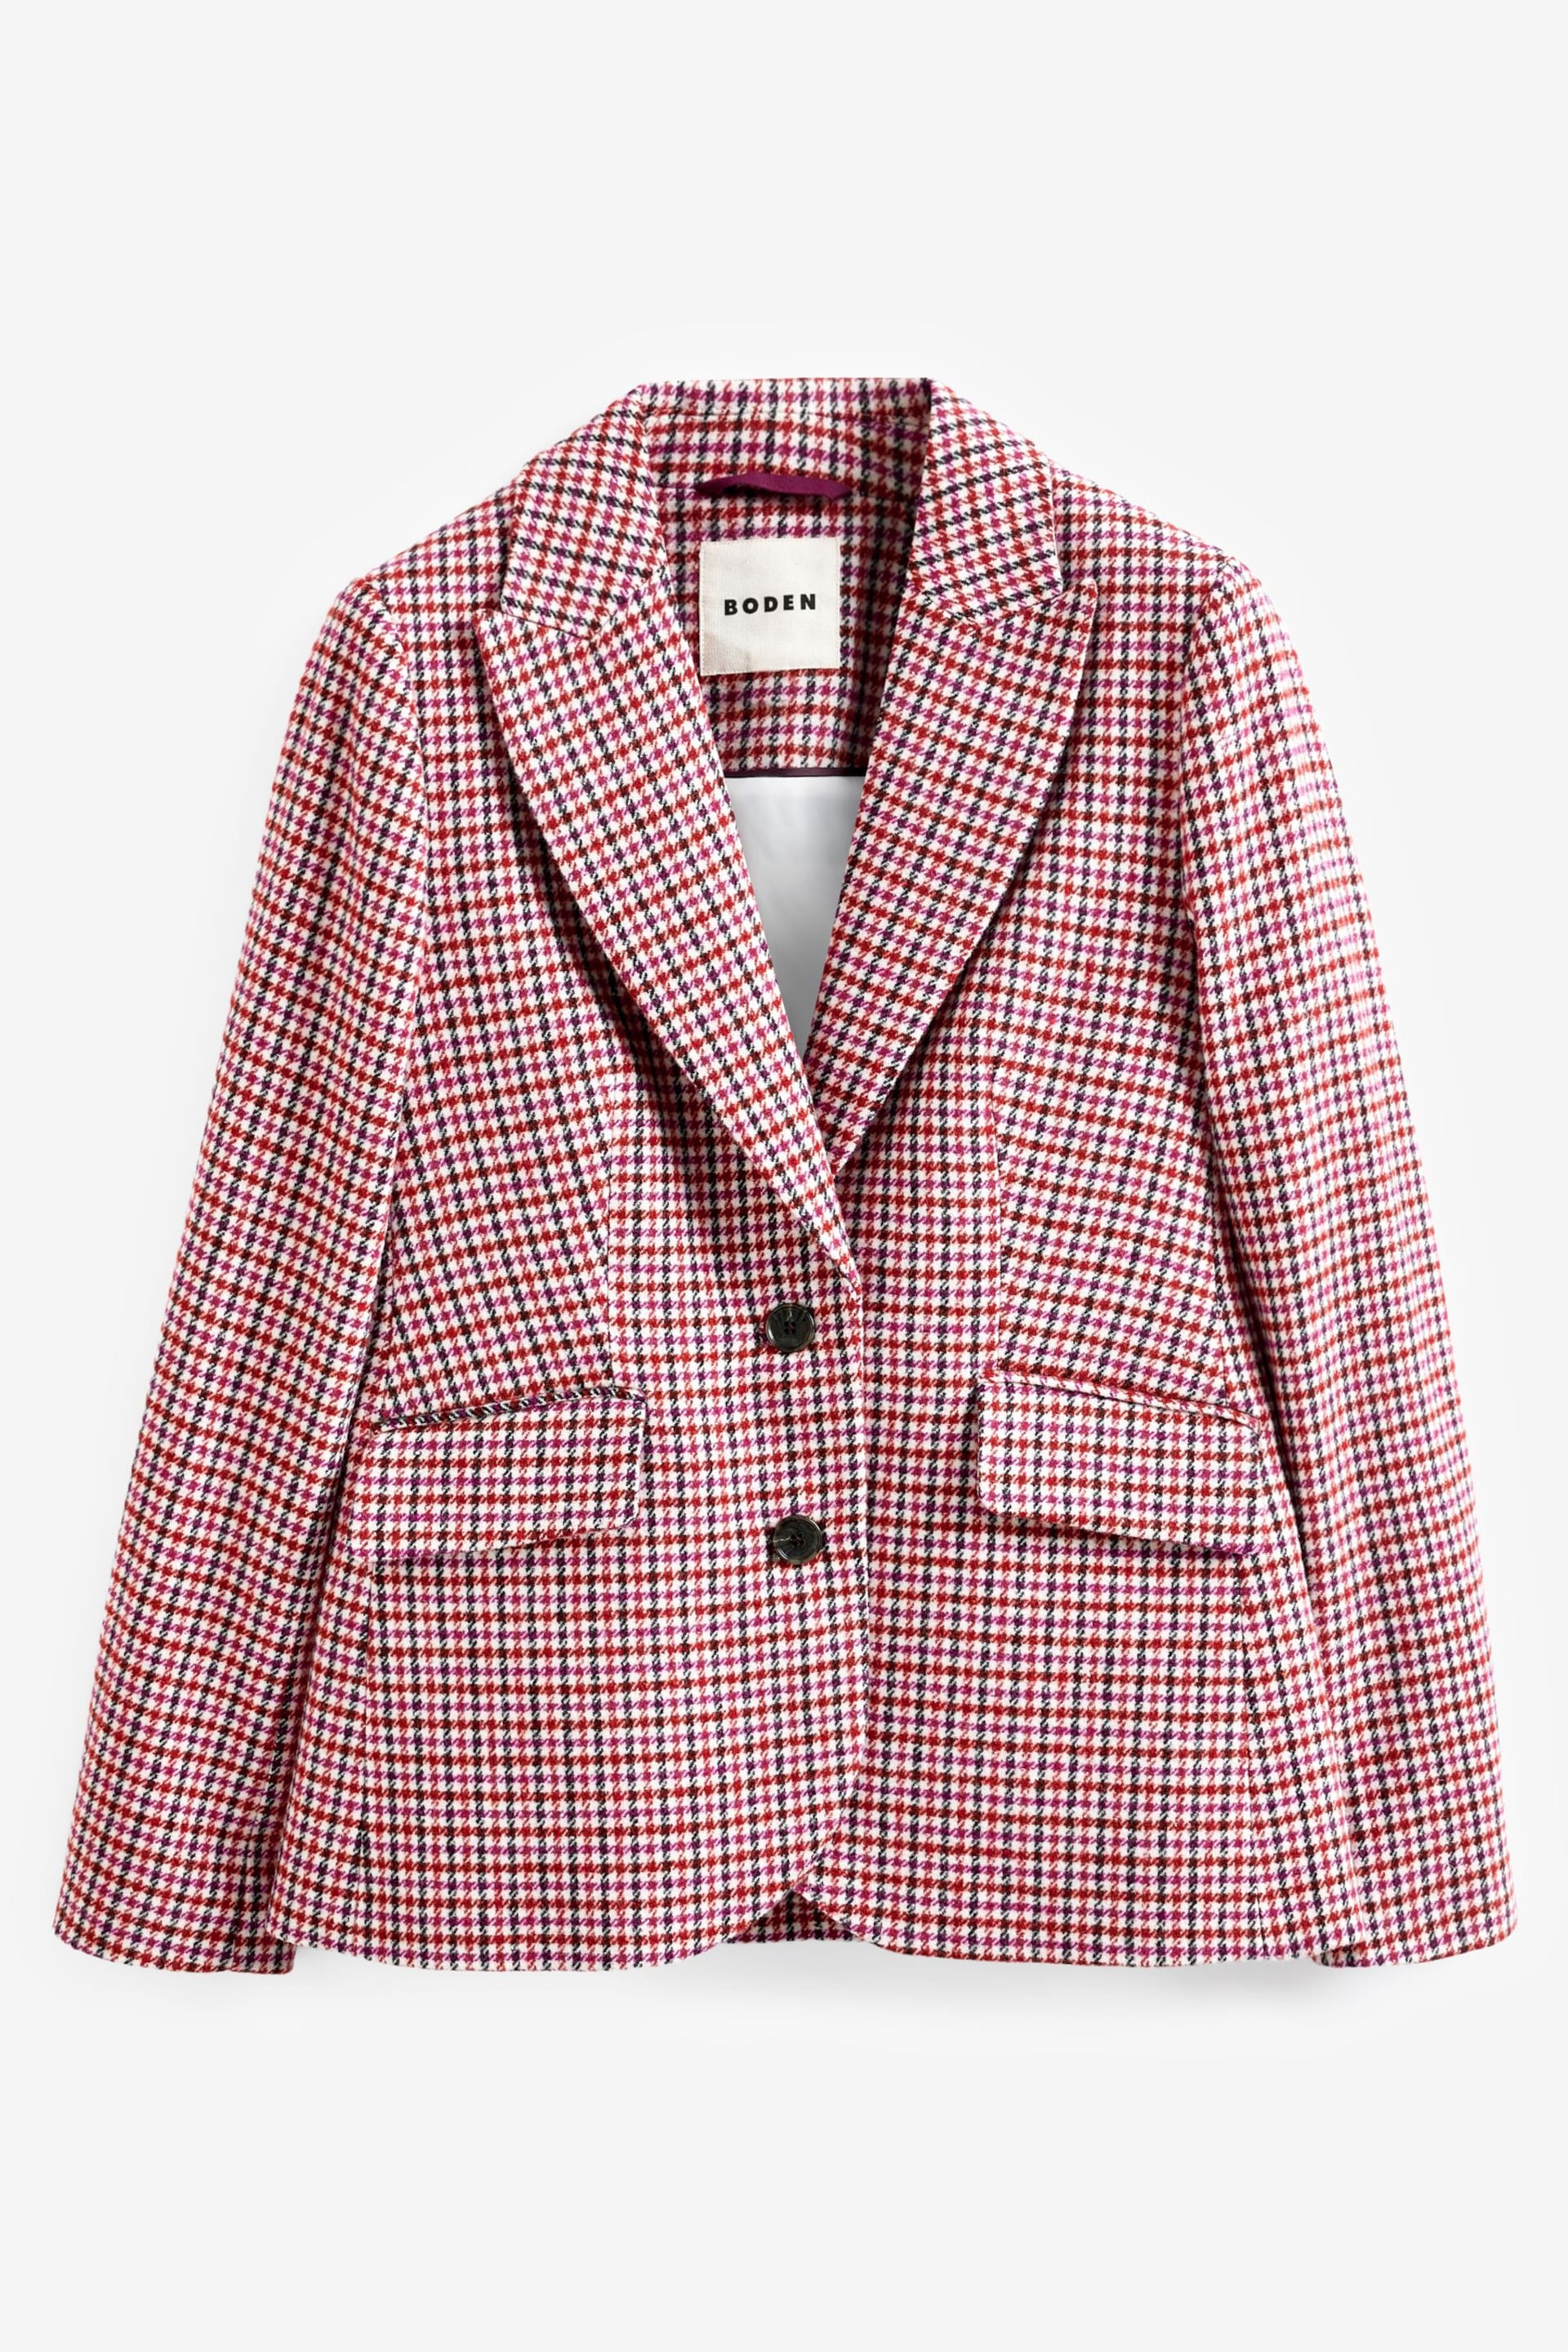 Boden Red The Marylebone Checked Blazer - Image 5 of 5